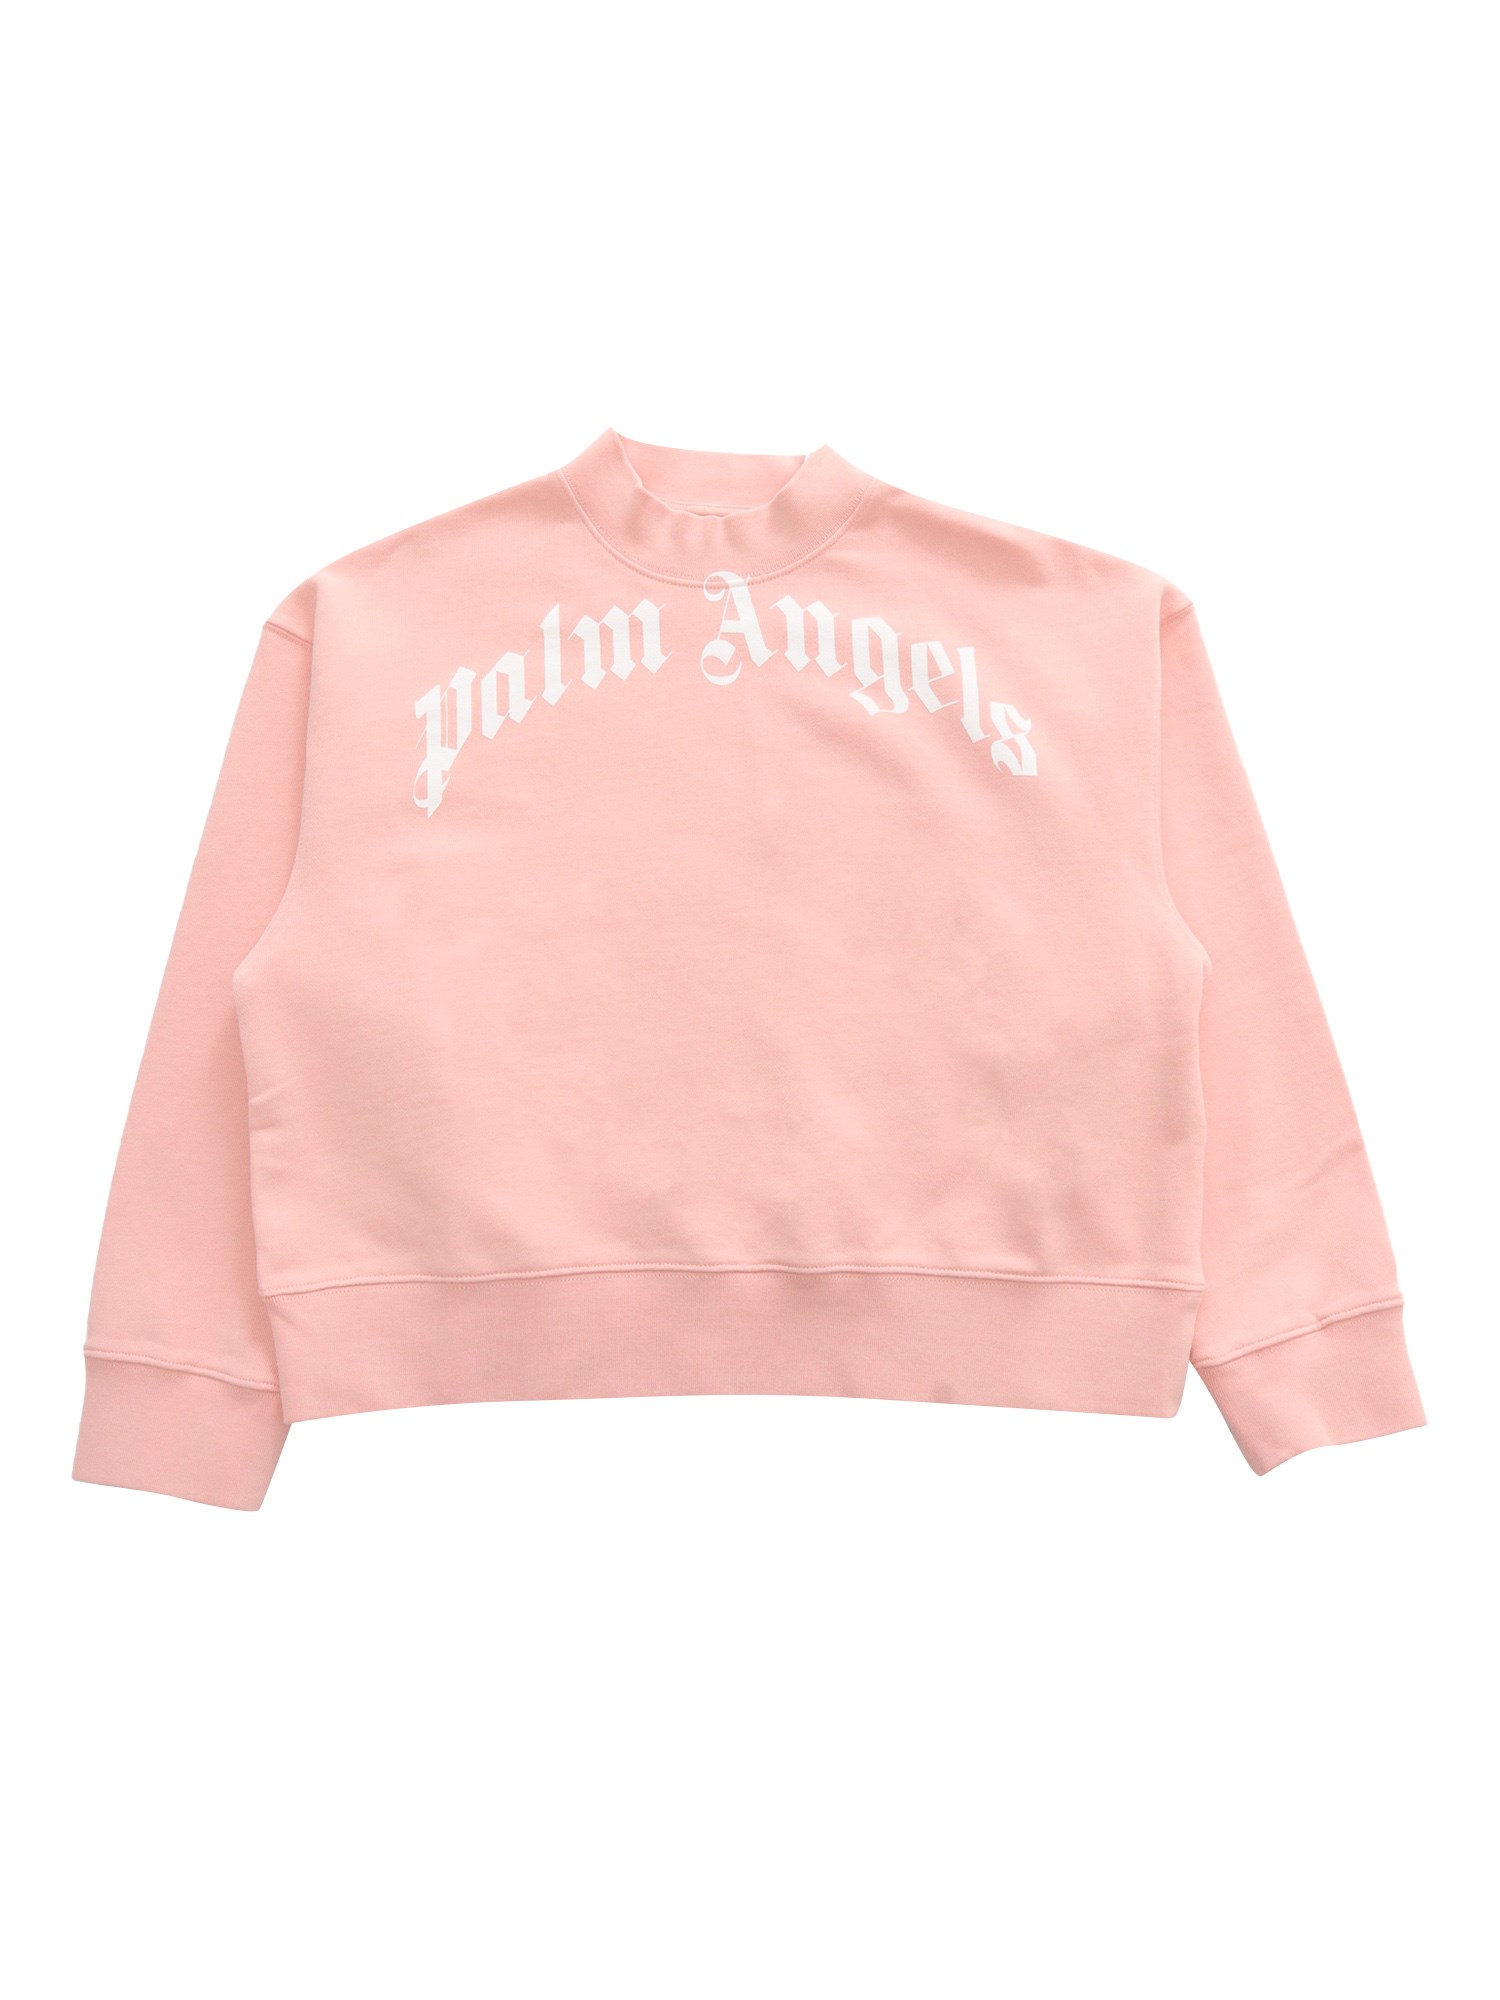 Palm Angels Curved Logo Sweatshirt In Pink